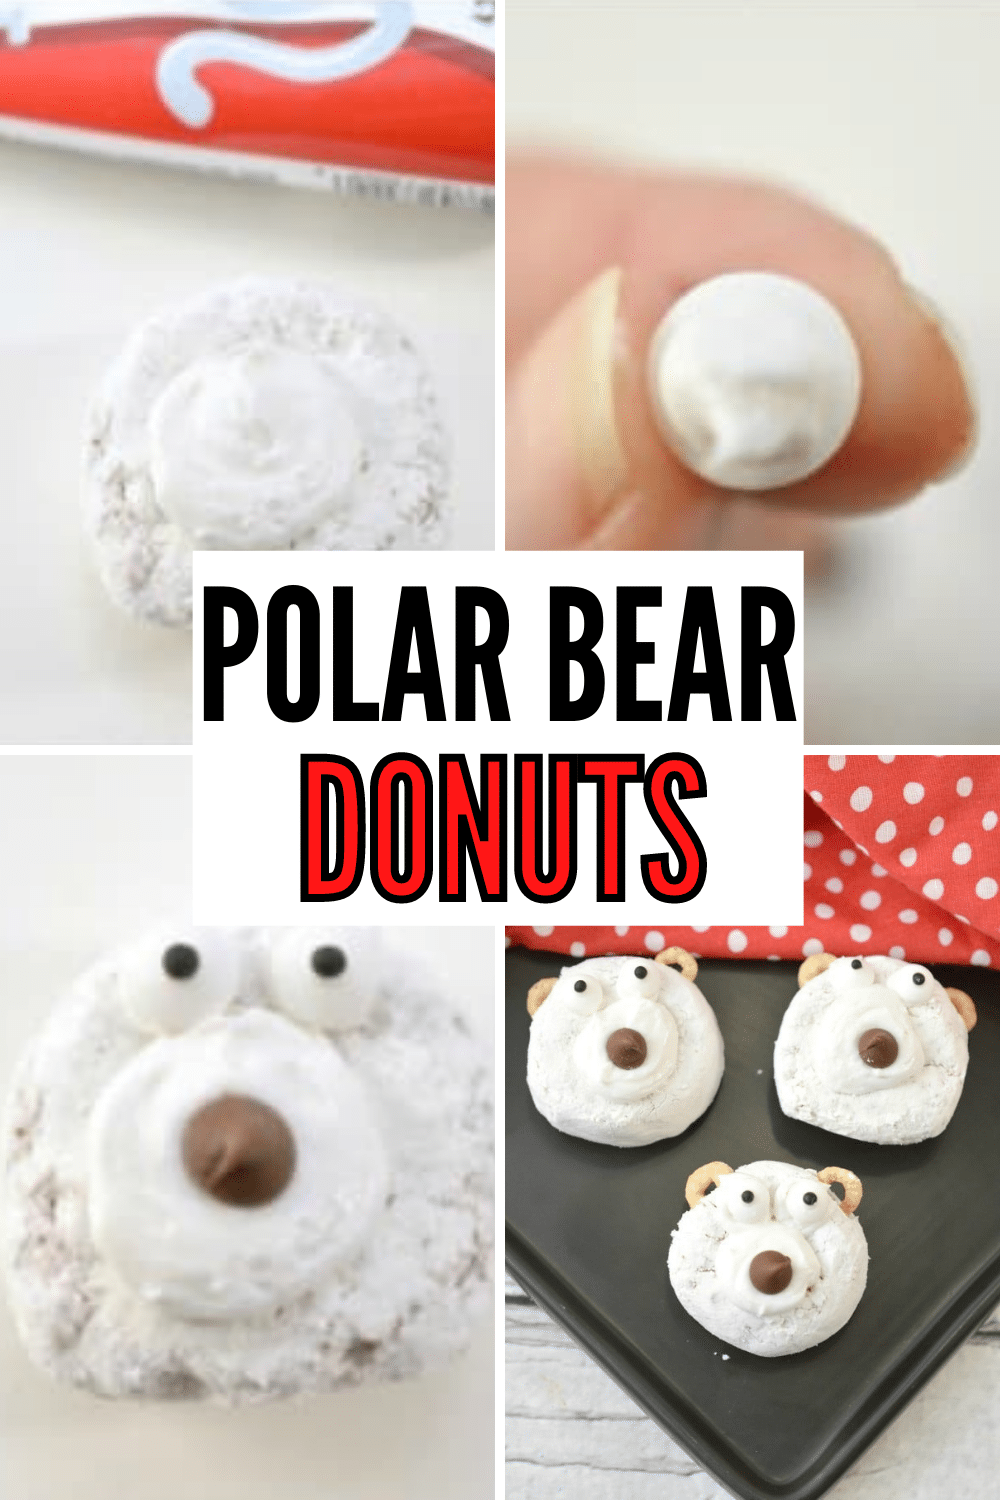 Polar bear donuts are a fun breakfast treat that will put a smile on you children's faces! This is a cute and quick breakfast idea using a powdered donut. #donuts #polarbears #funfood #breakfast via @wondermomwannab